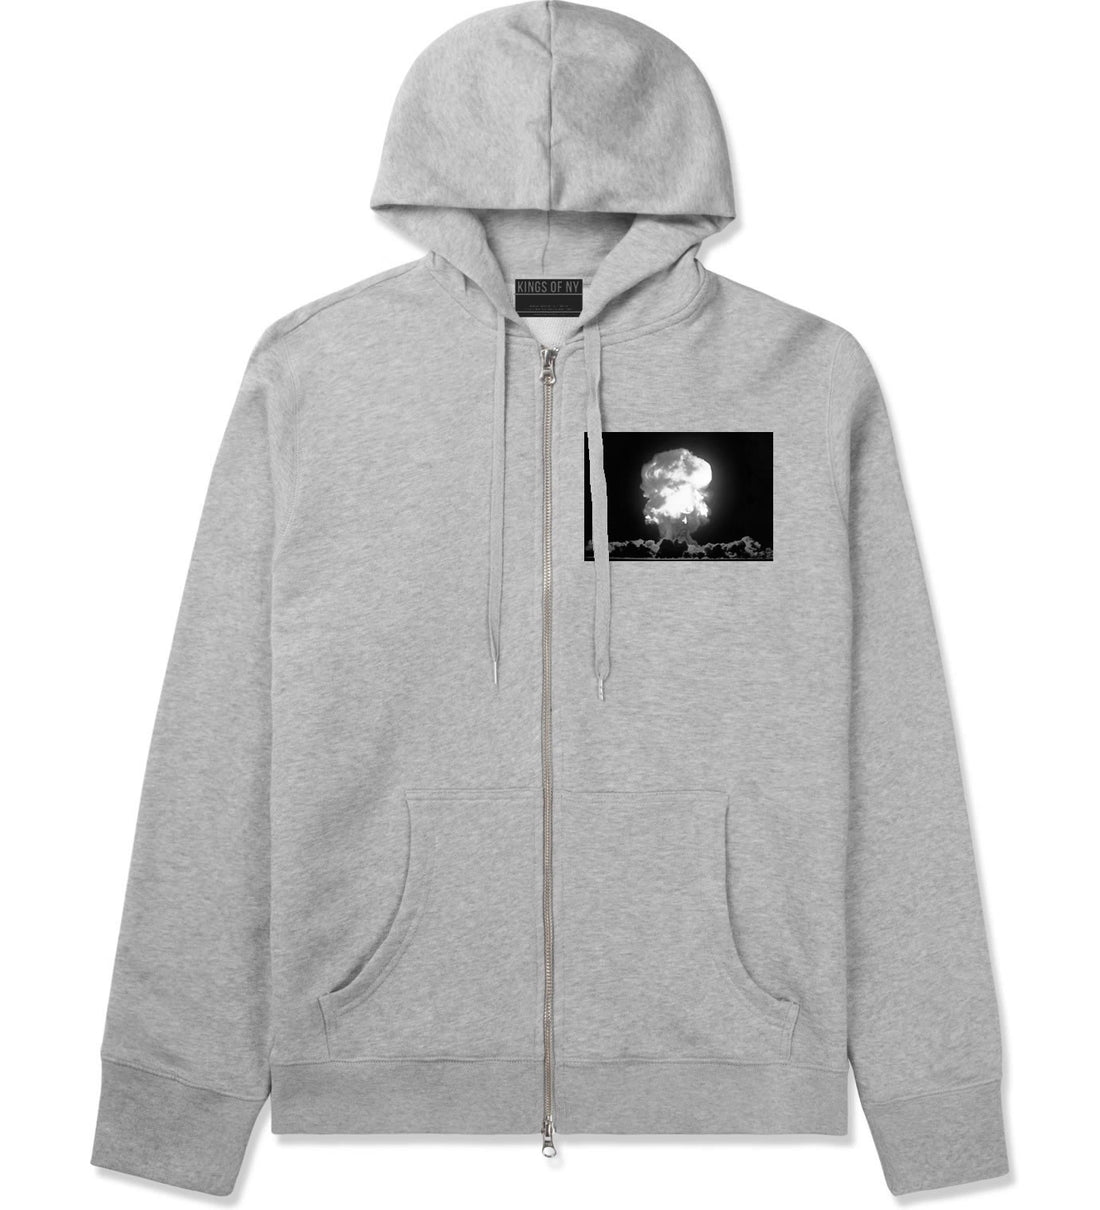 Explosion Nuclear Bomb Cloud Zip Up Hoodie in Grey By Kings Of NY